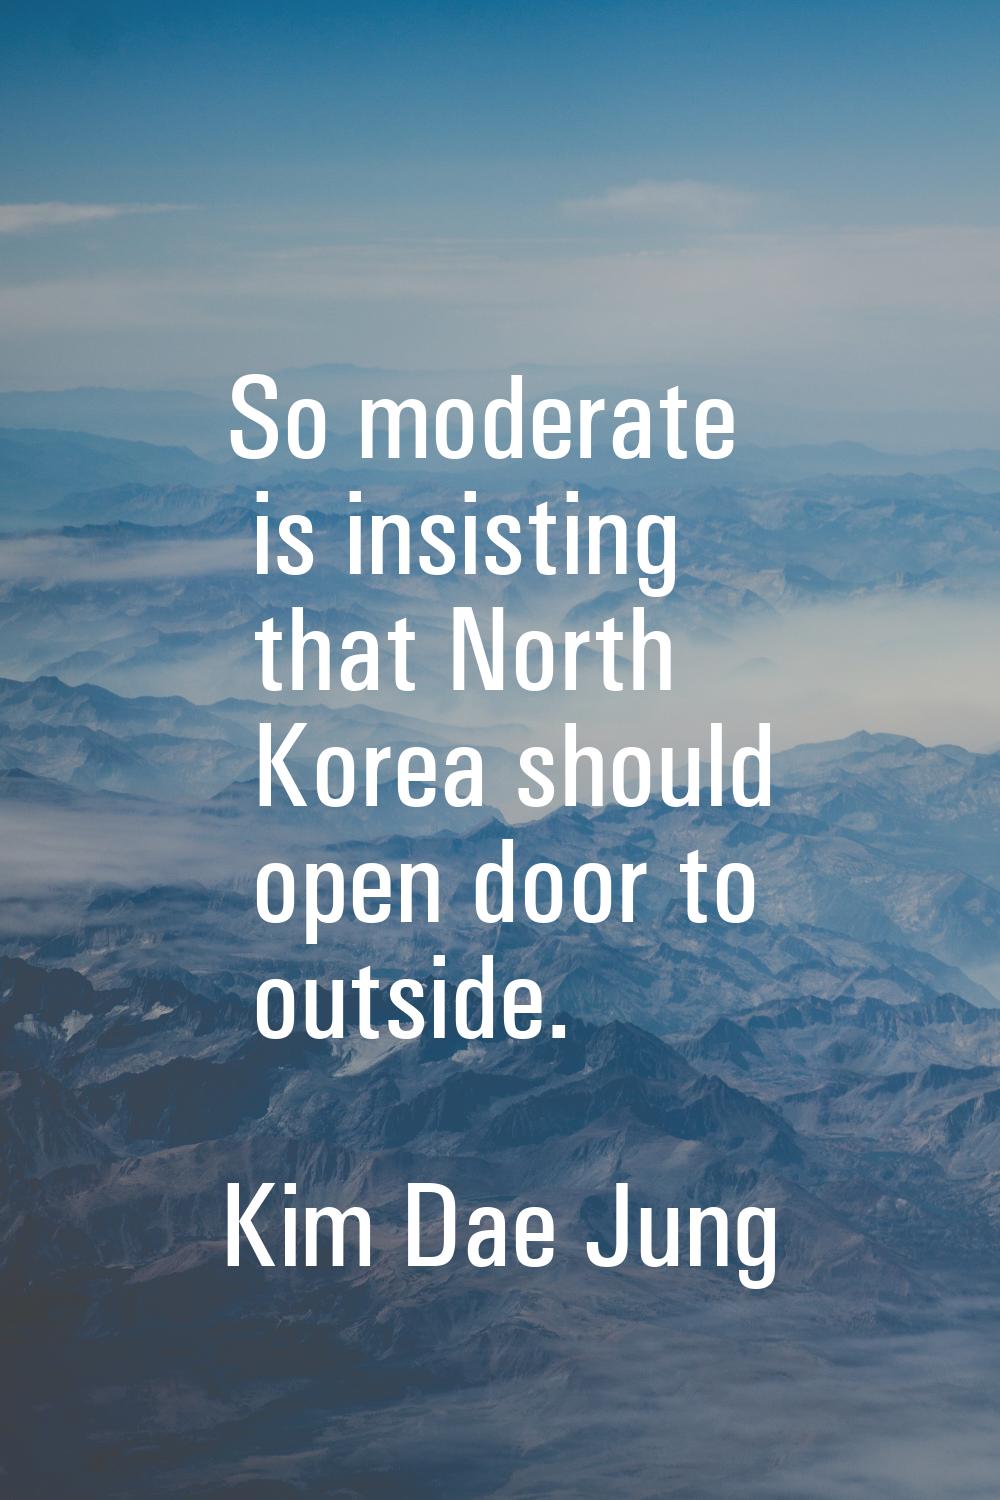 So moderate is insisting that North Korea should open door to outside.